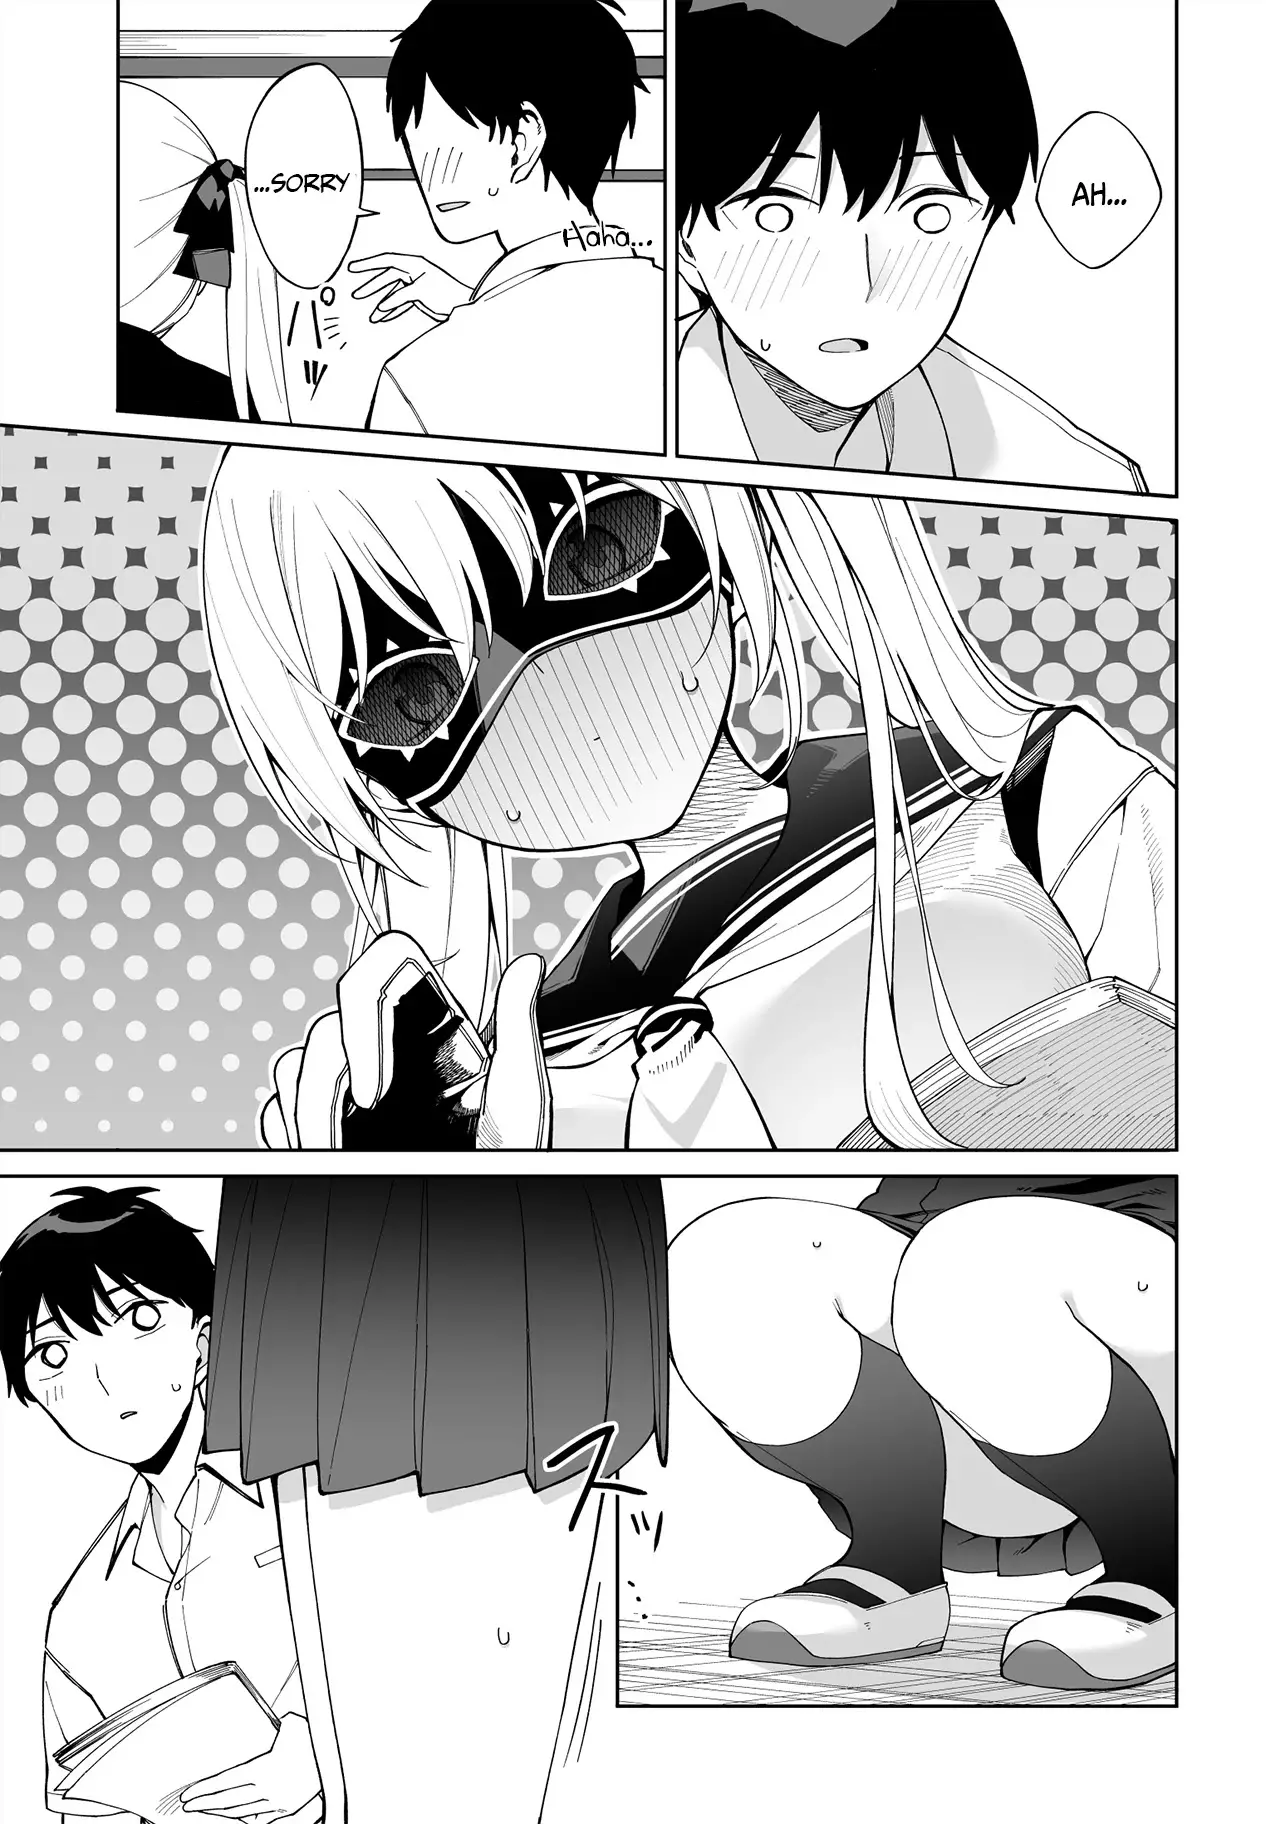 I Don't Understand Shirogane-San's Facial Expression At All - 6 page 20